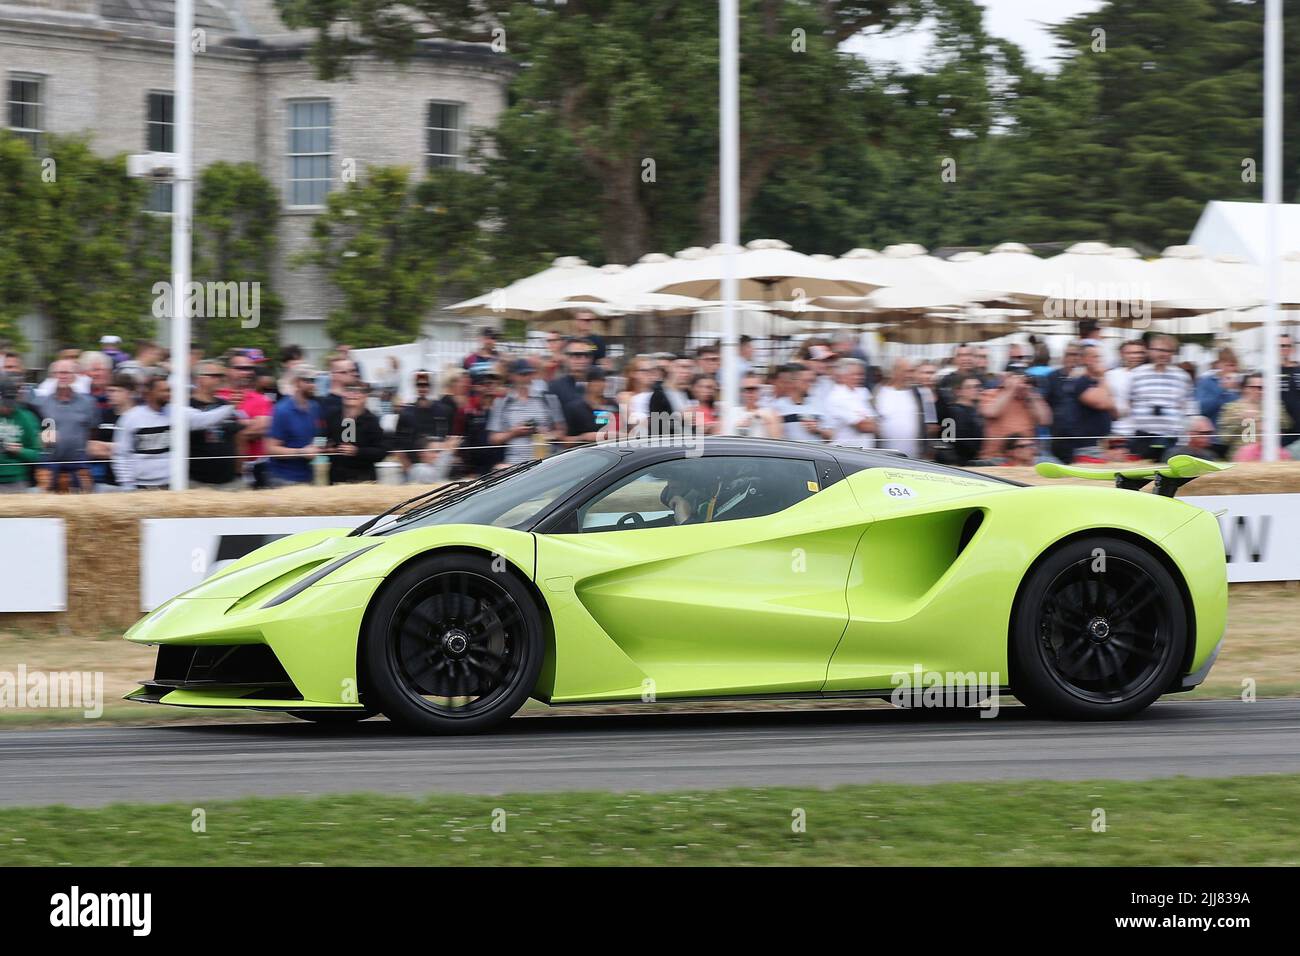 Lotus Evija supercar at the Festival of Speed 2022 at Goodwood, Sussex, UK Stock Photo